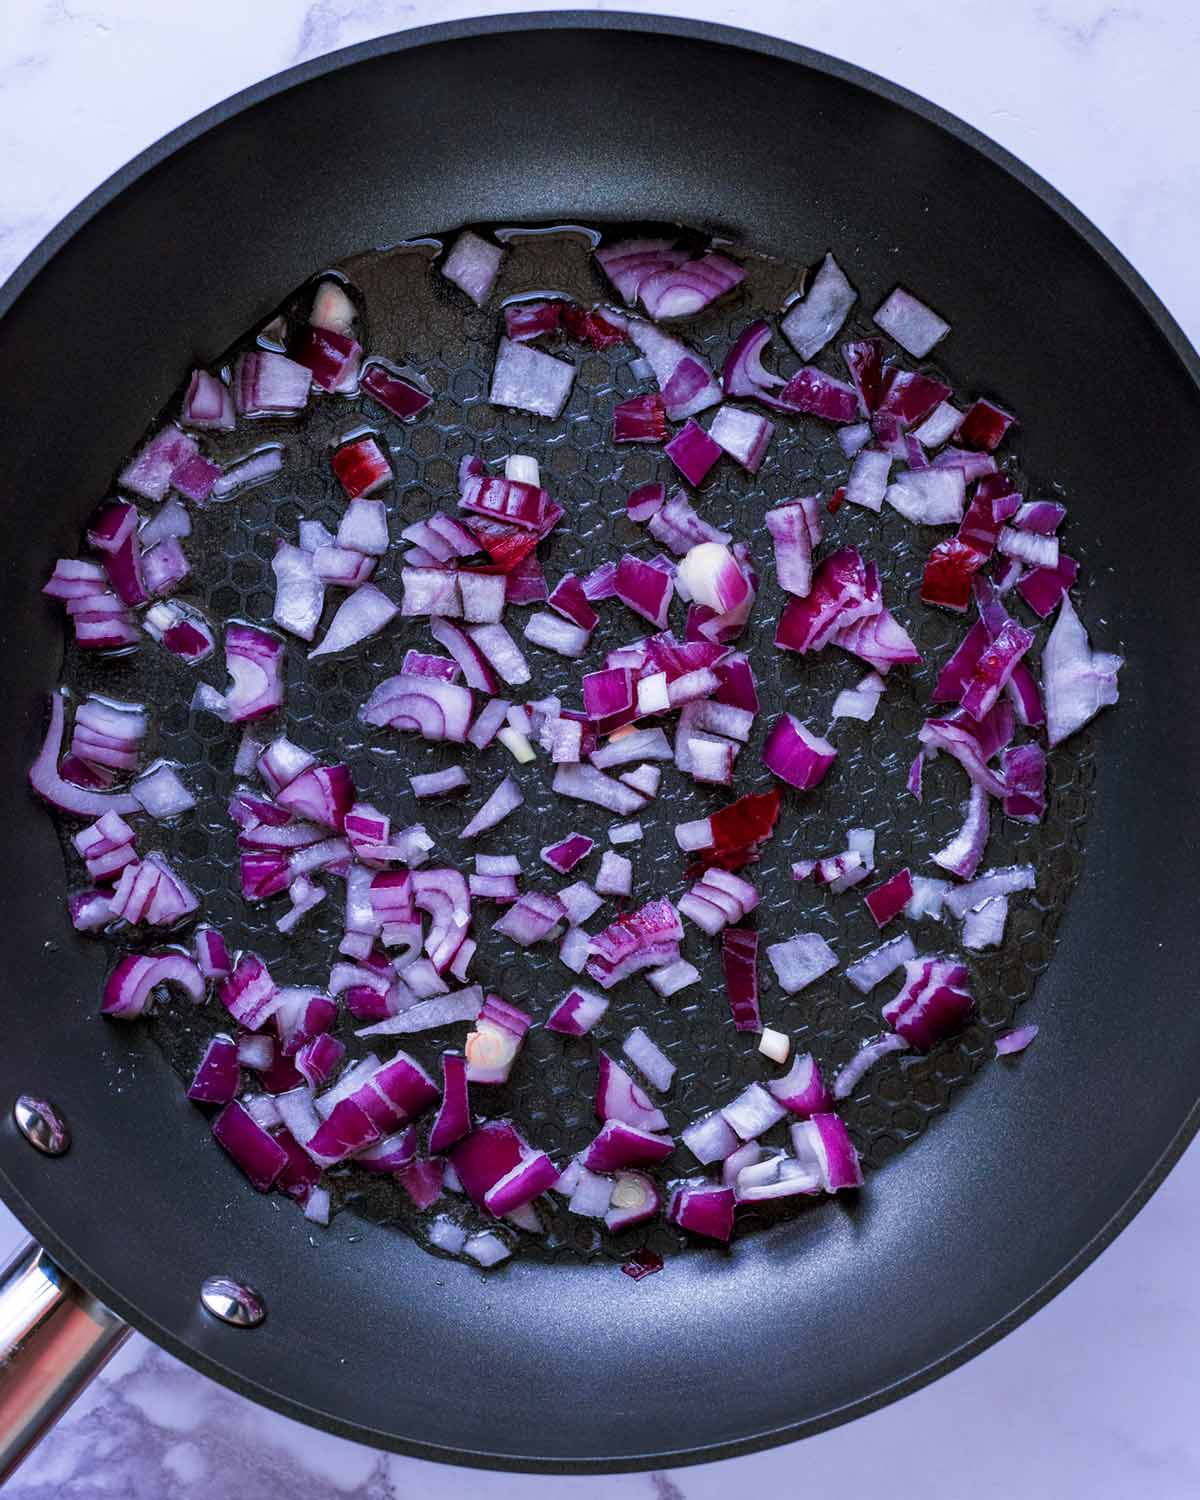 Chopped red onion cooking in a frying pan.